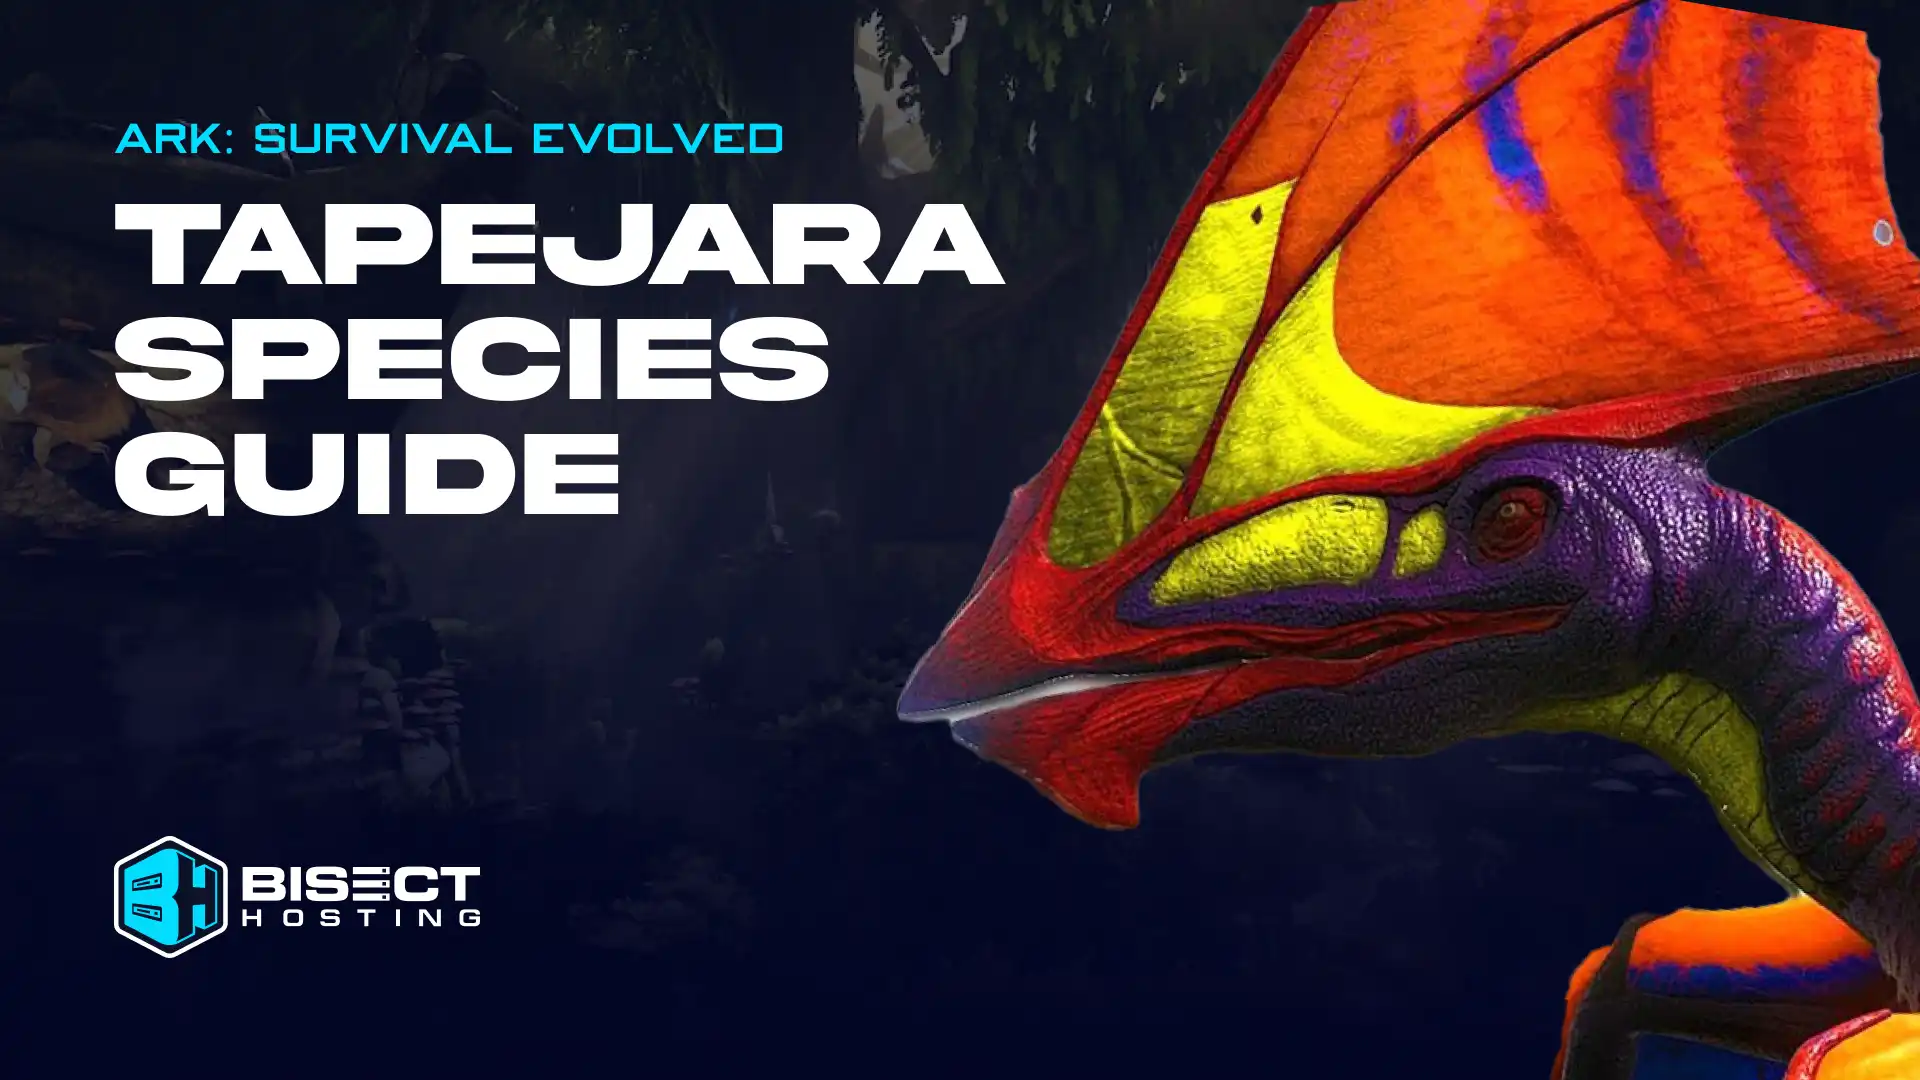 ARK: Survival Evolved Tapejara Species Guide - Stats, How to Tame, Locations, & More